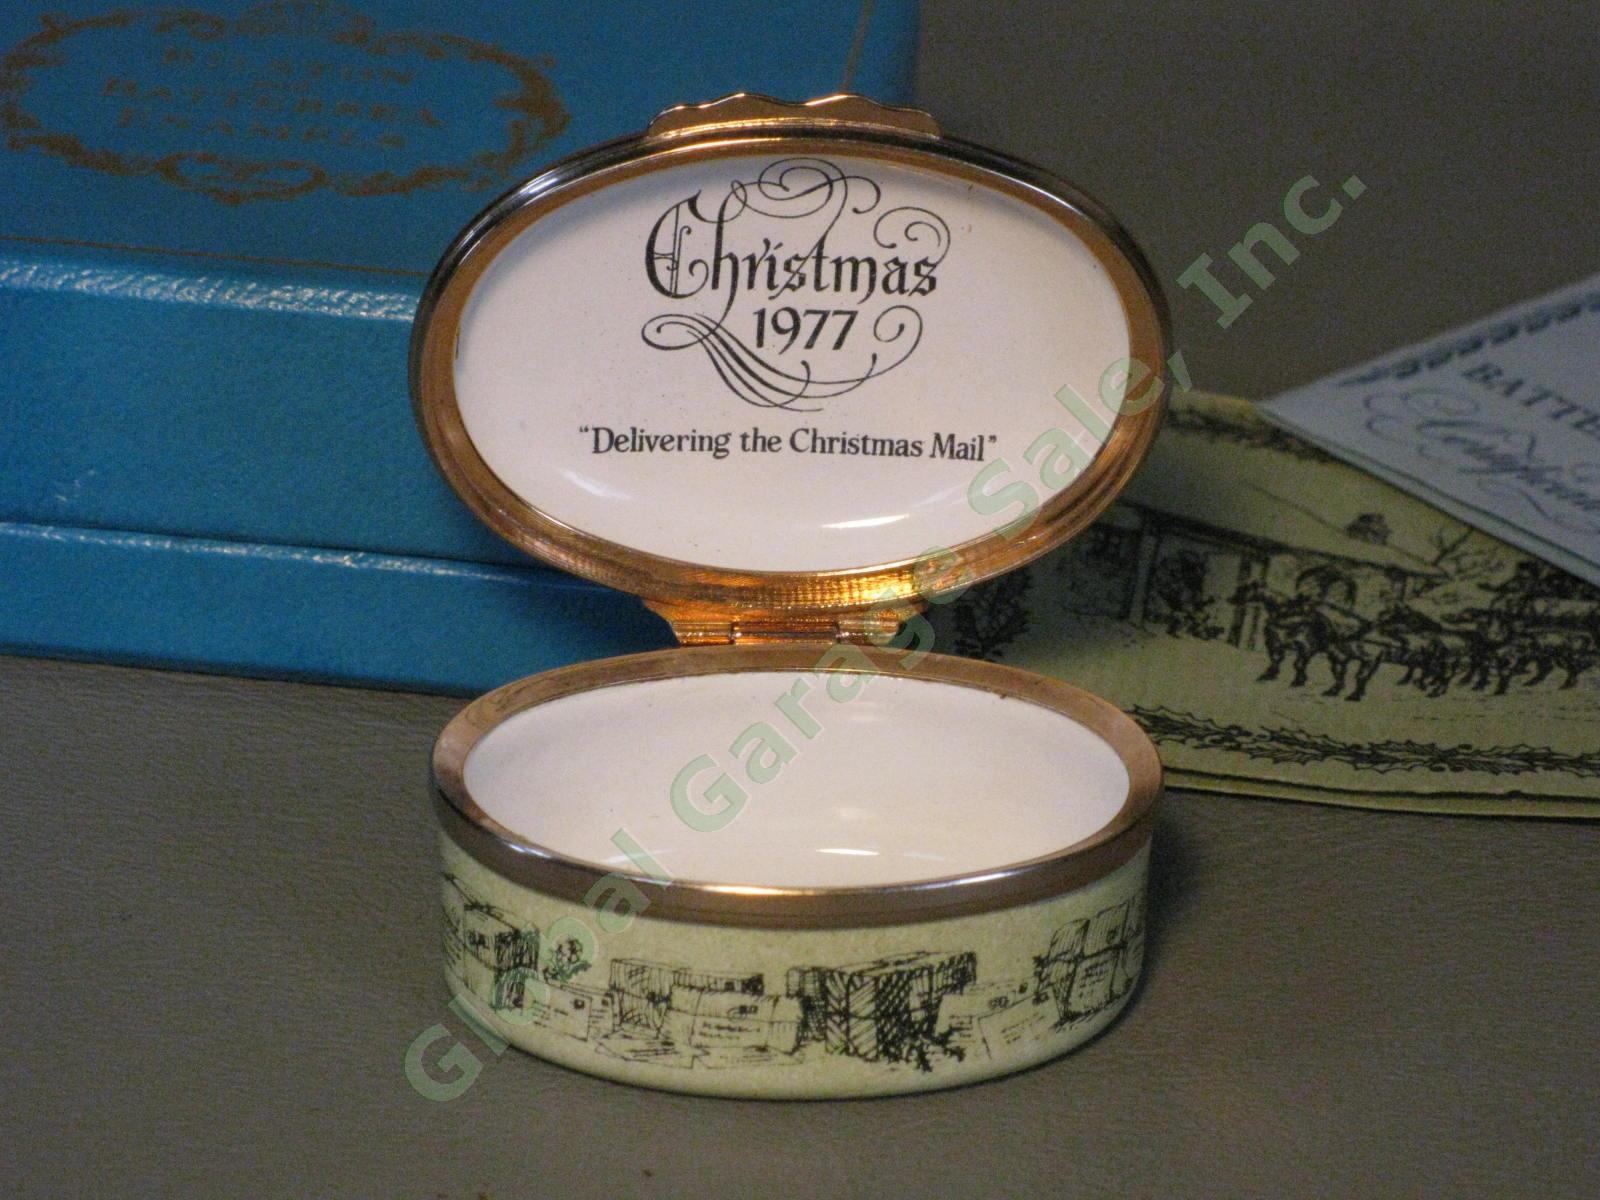 Limited Edition 1977 Halcyon Days Delivering Christmas Mail Enamel Trinket Box 6